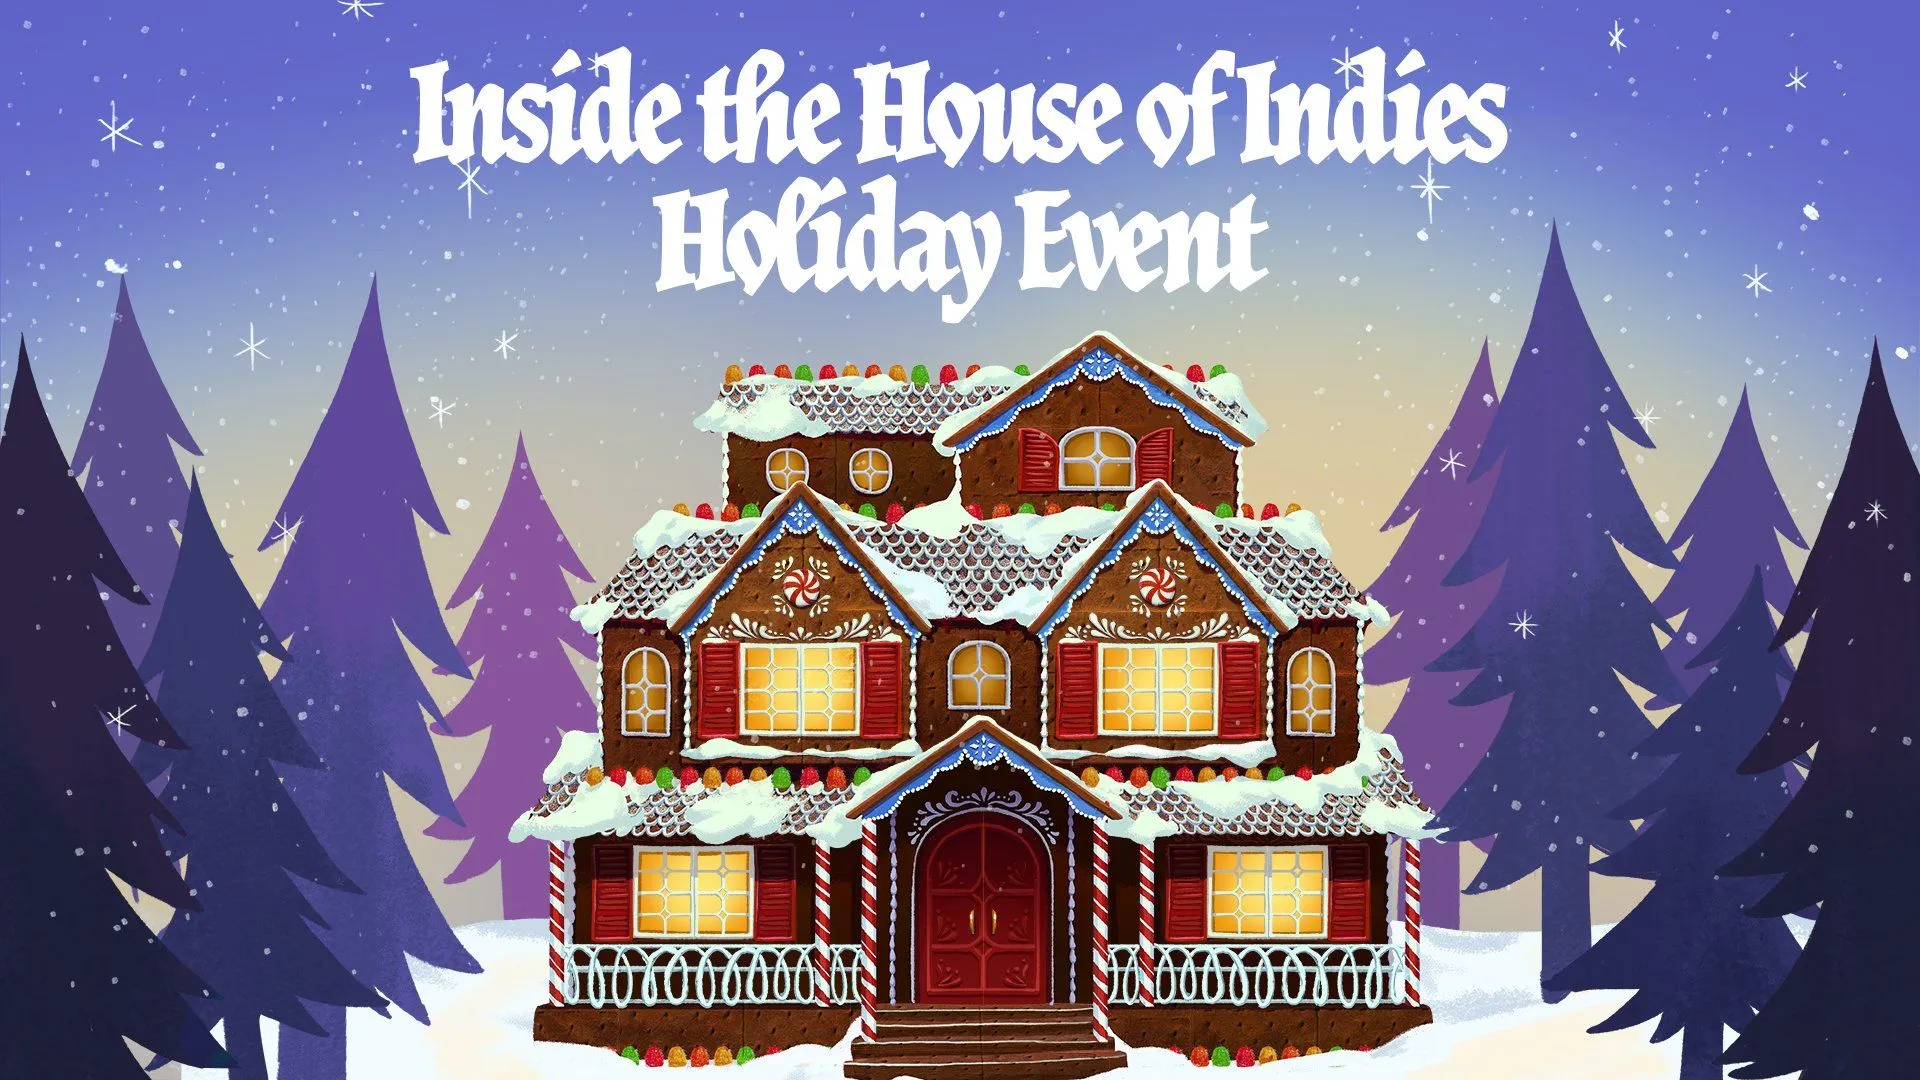 This Week, Nintendo’s Hosting a ‘House of Indies’ Holiday Event